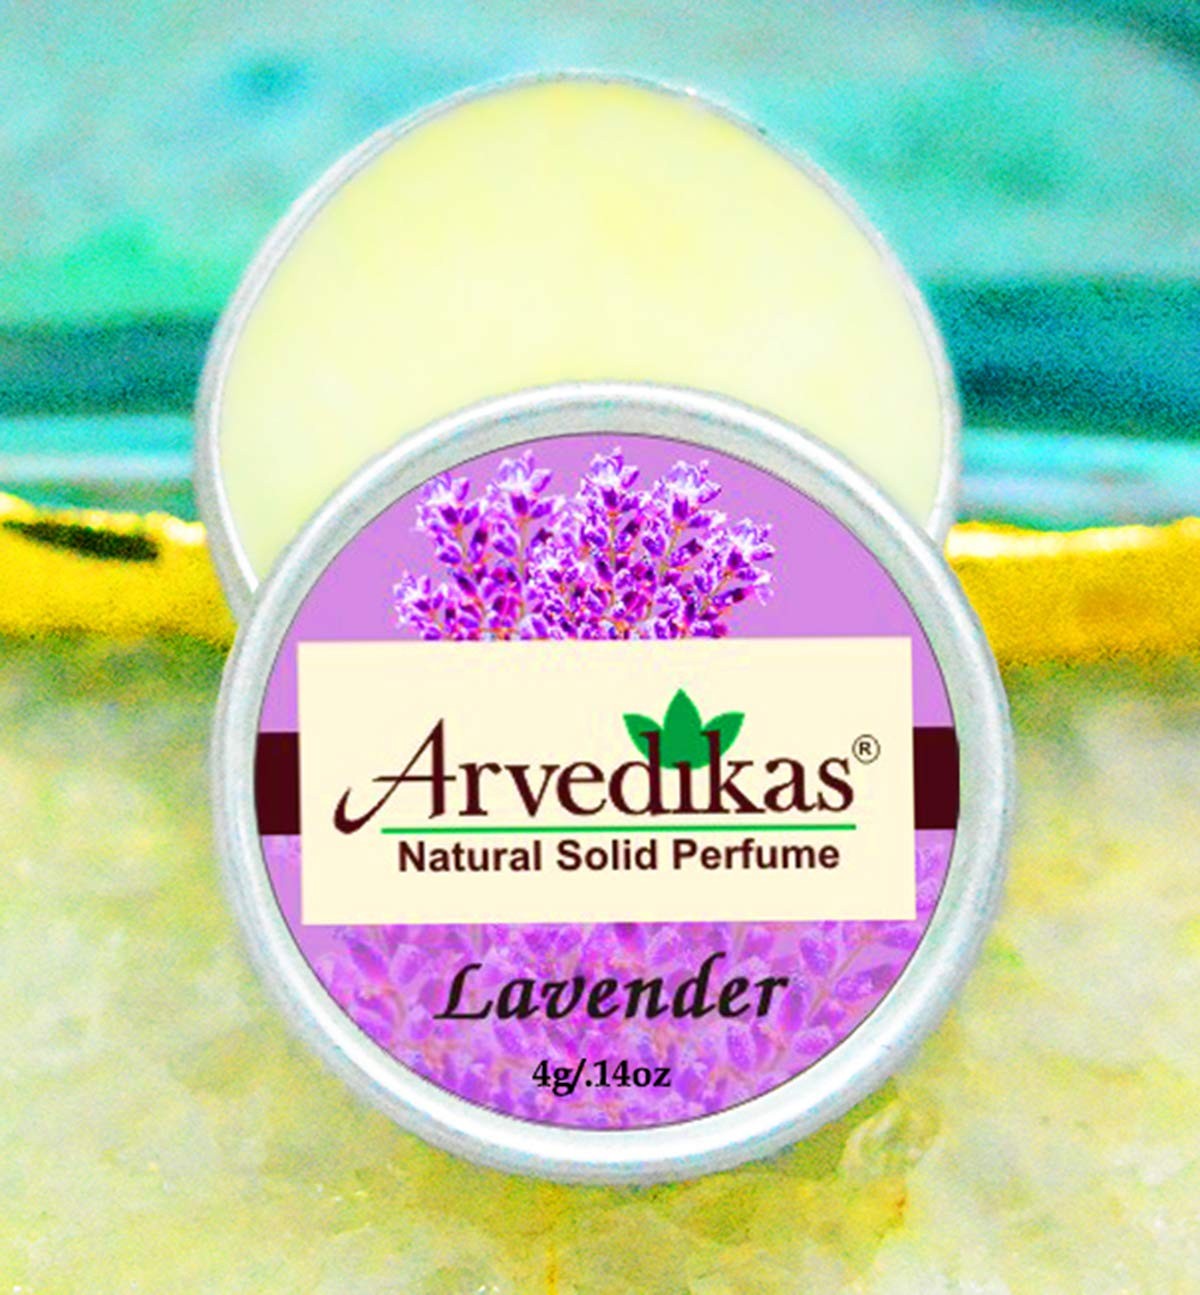 Lavender Natural Solid Perfume Pocket Size Compact Cologne Scented Balm Skin Friendly Body Parfum